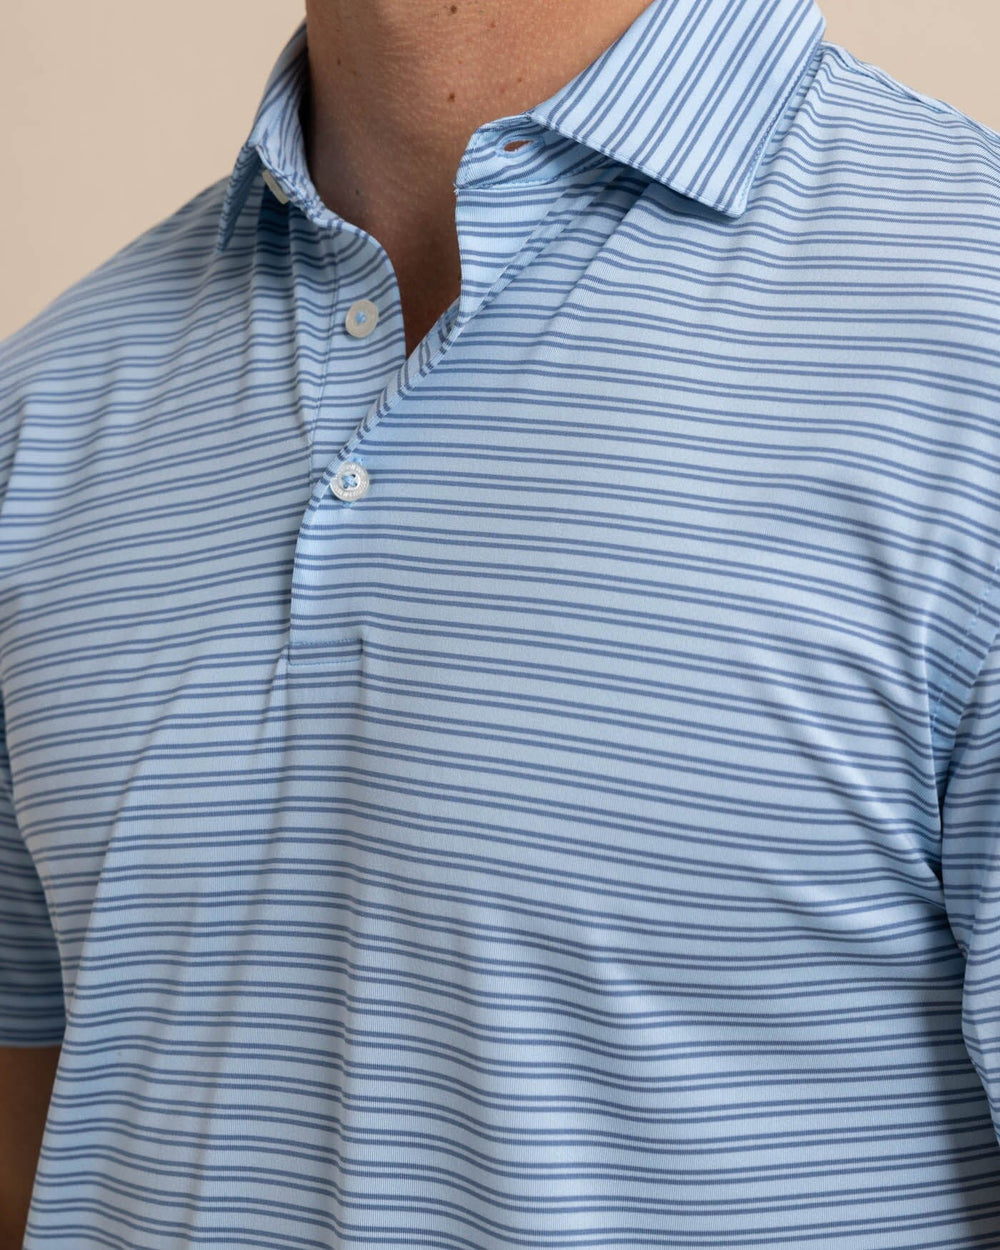 The detail view of the Southern Tide Driver Baywoods Stripe Polo by Southern Tide - Clearwater Blue